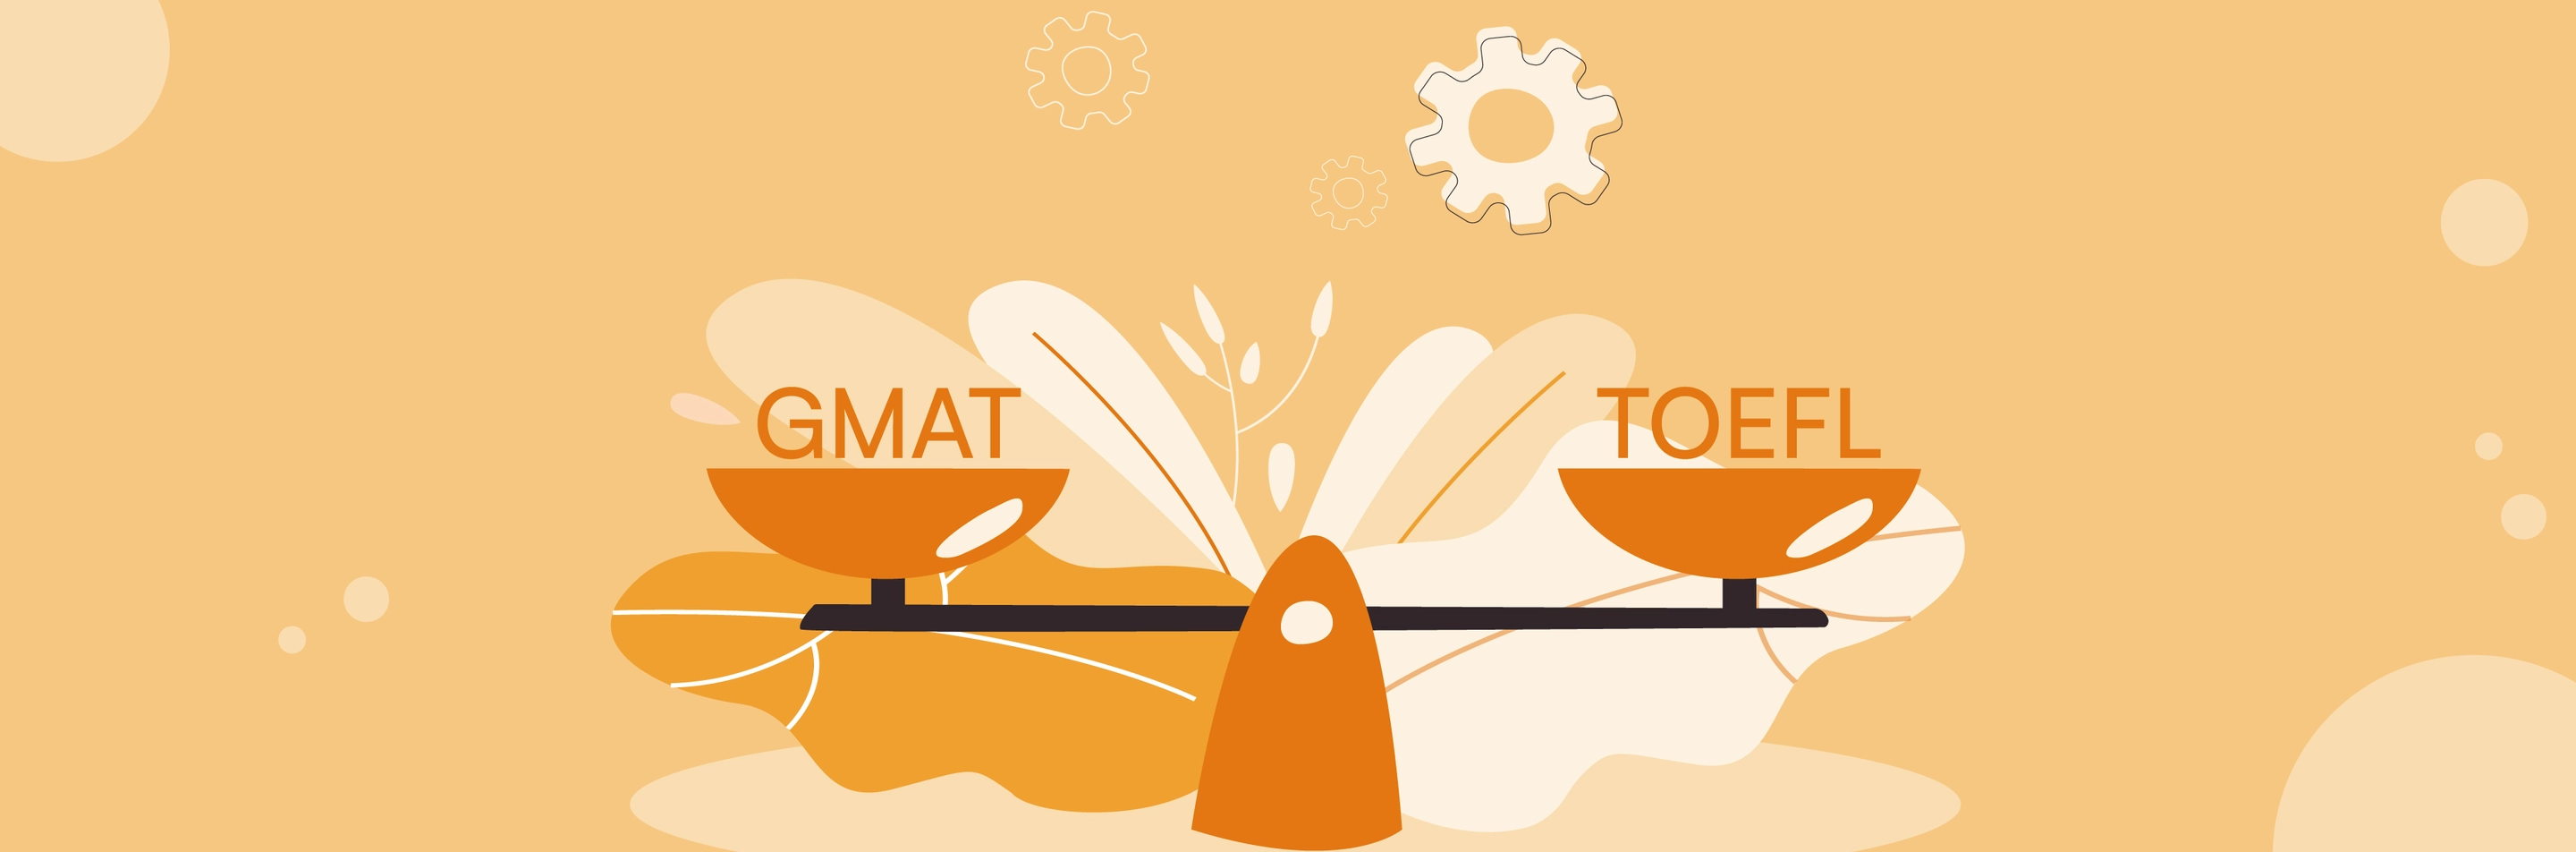 GMAT vs TOEFL: Know About the Difference Between TOEFL and GMAT Image